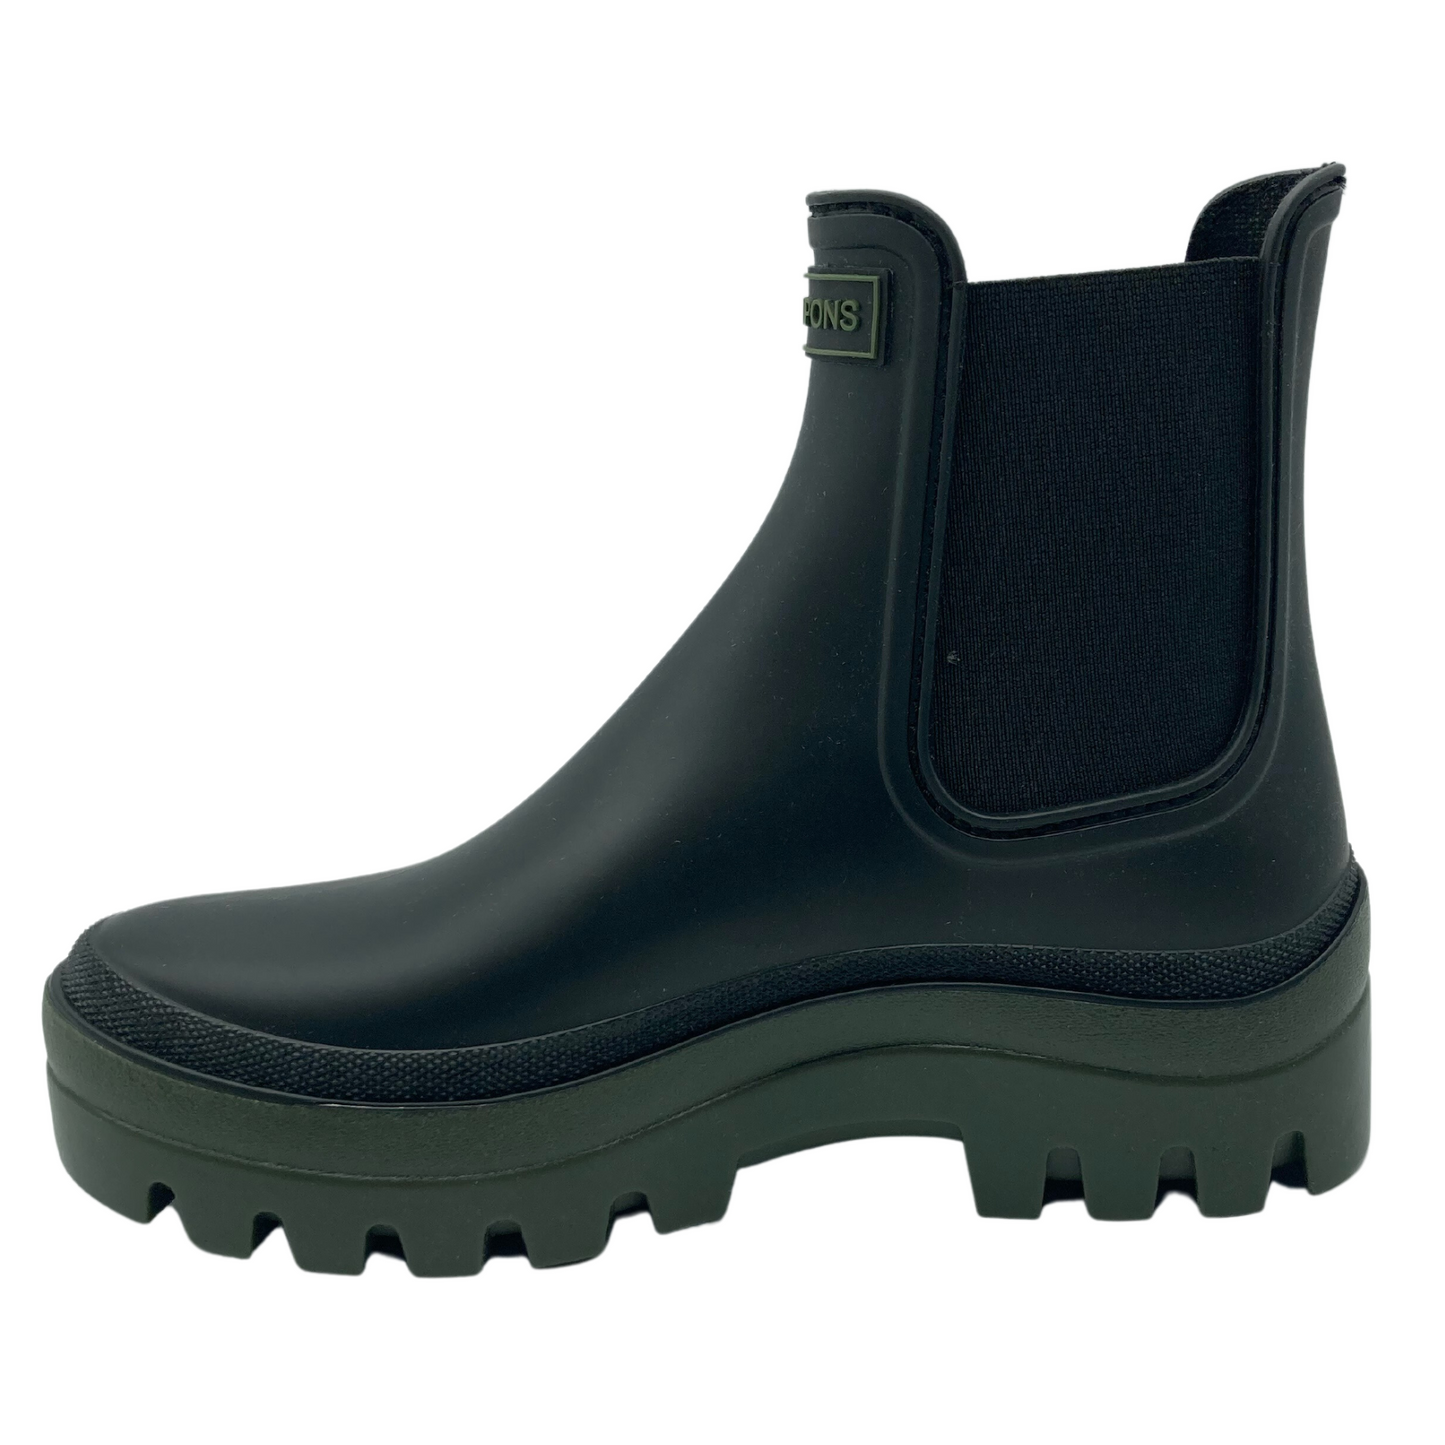 Left facing view of black waterproof short boot with khaki platform sole and elastic sides